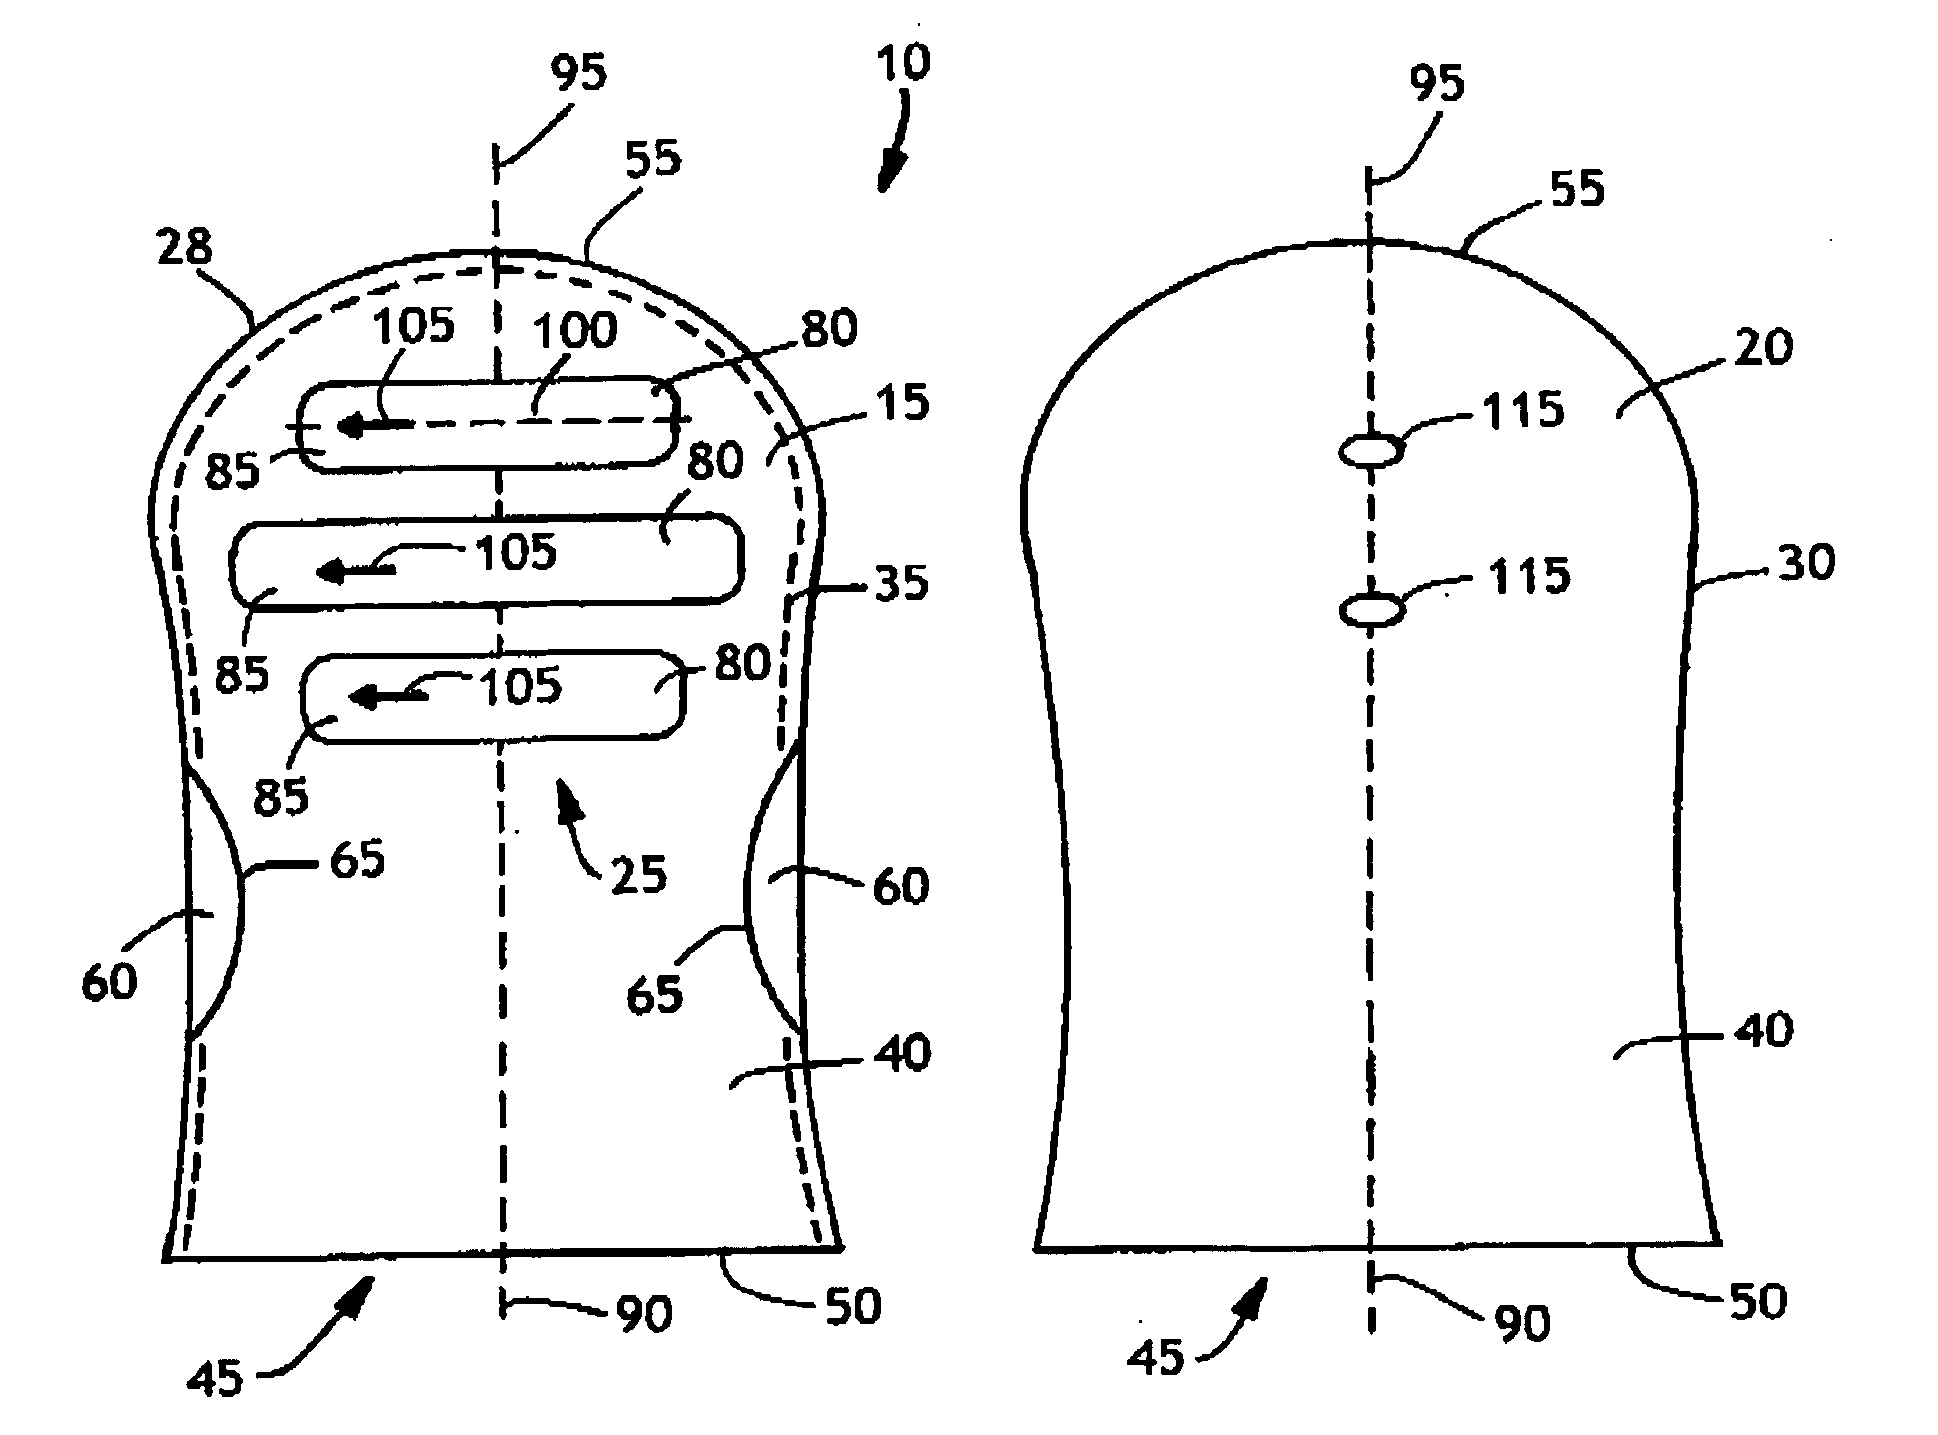 Grooming device for animals